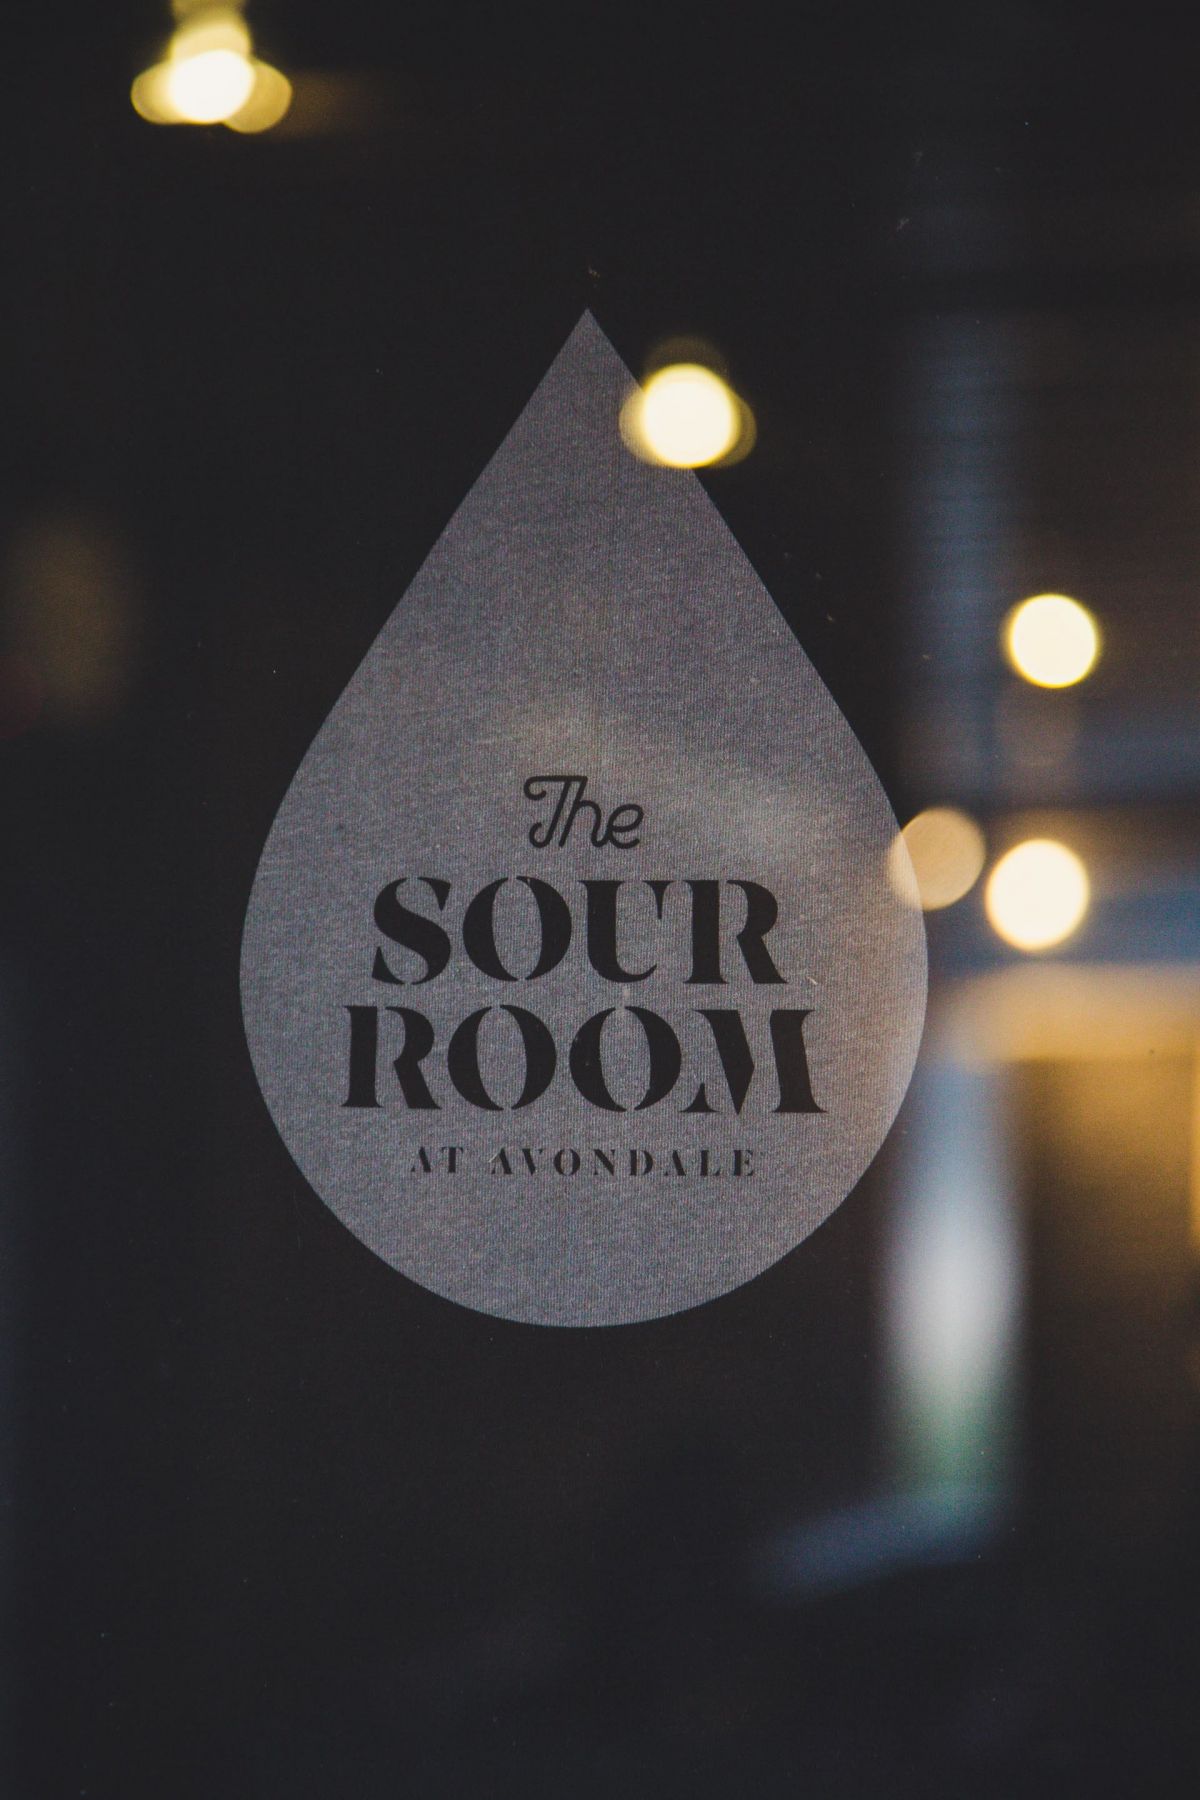 The Sour Room at Avondale